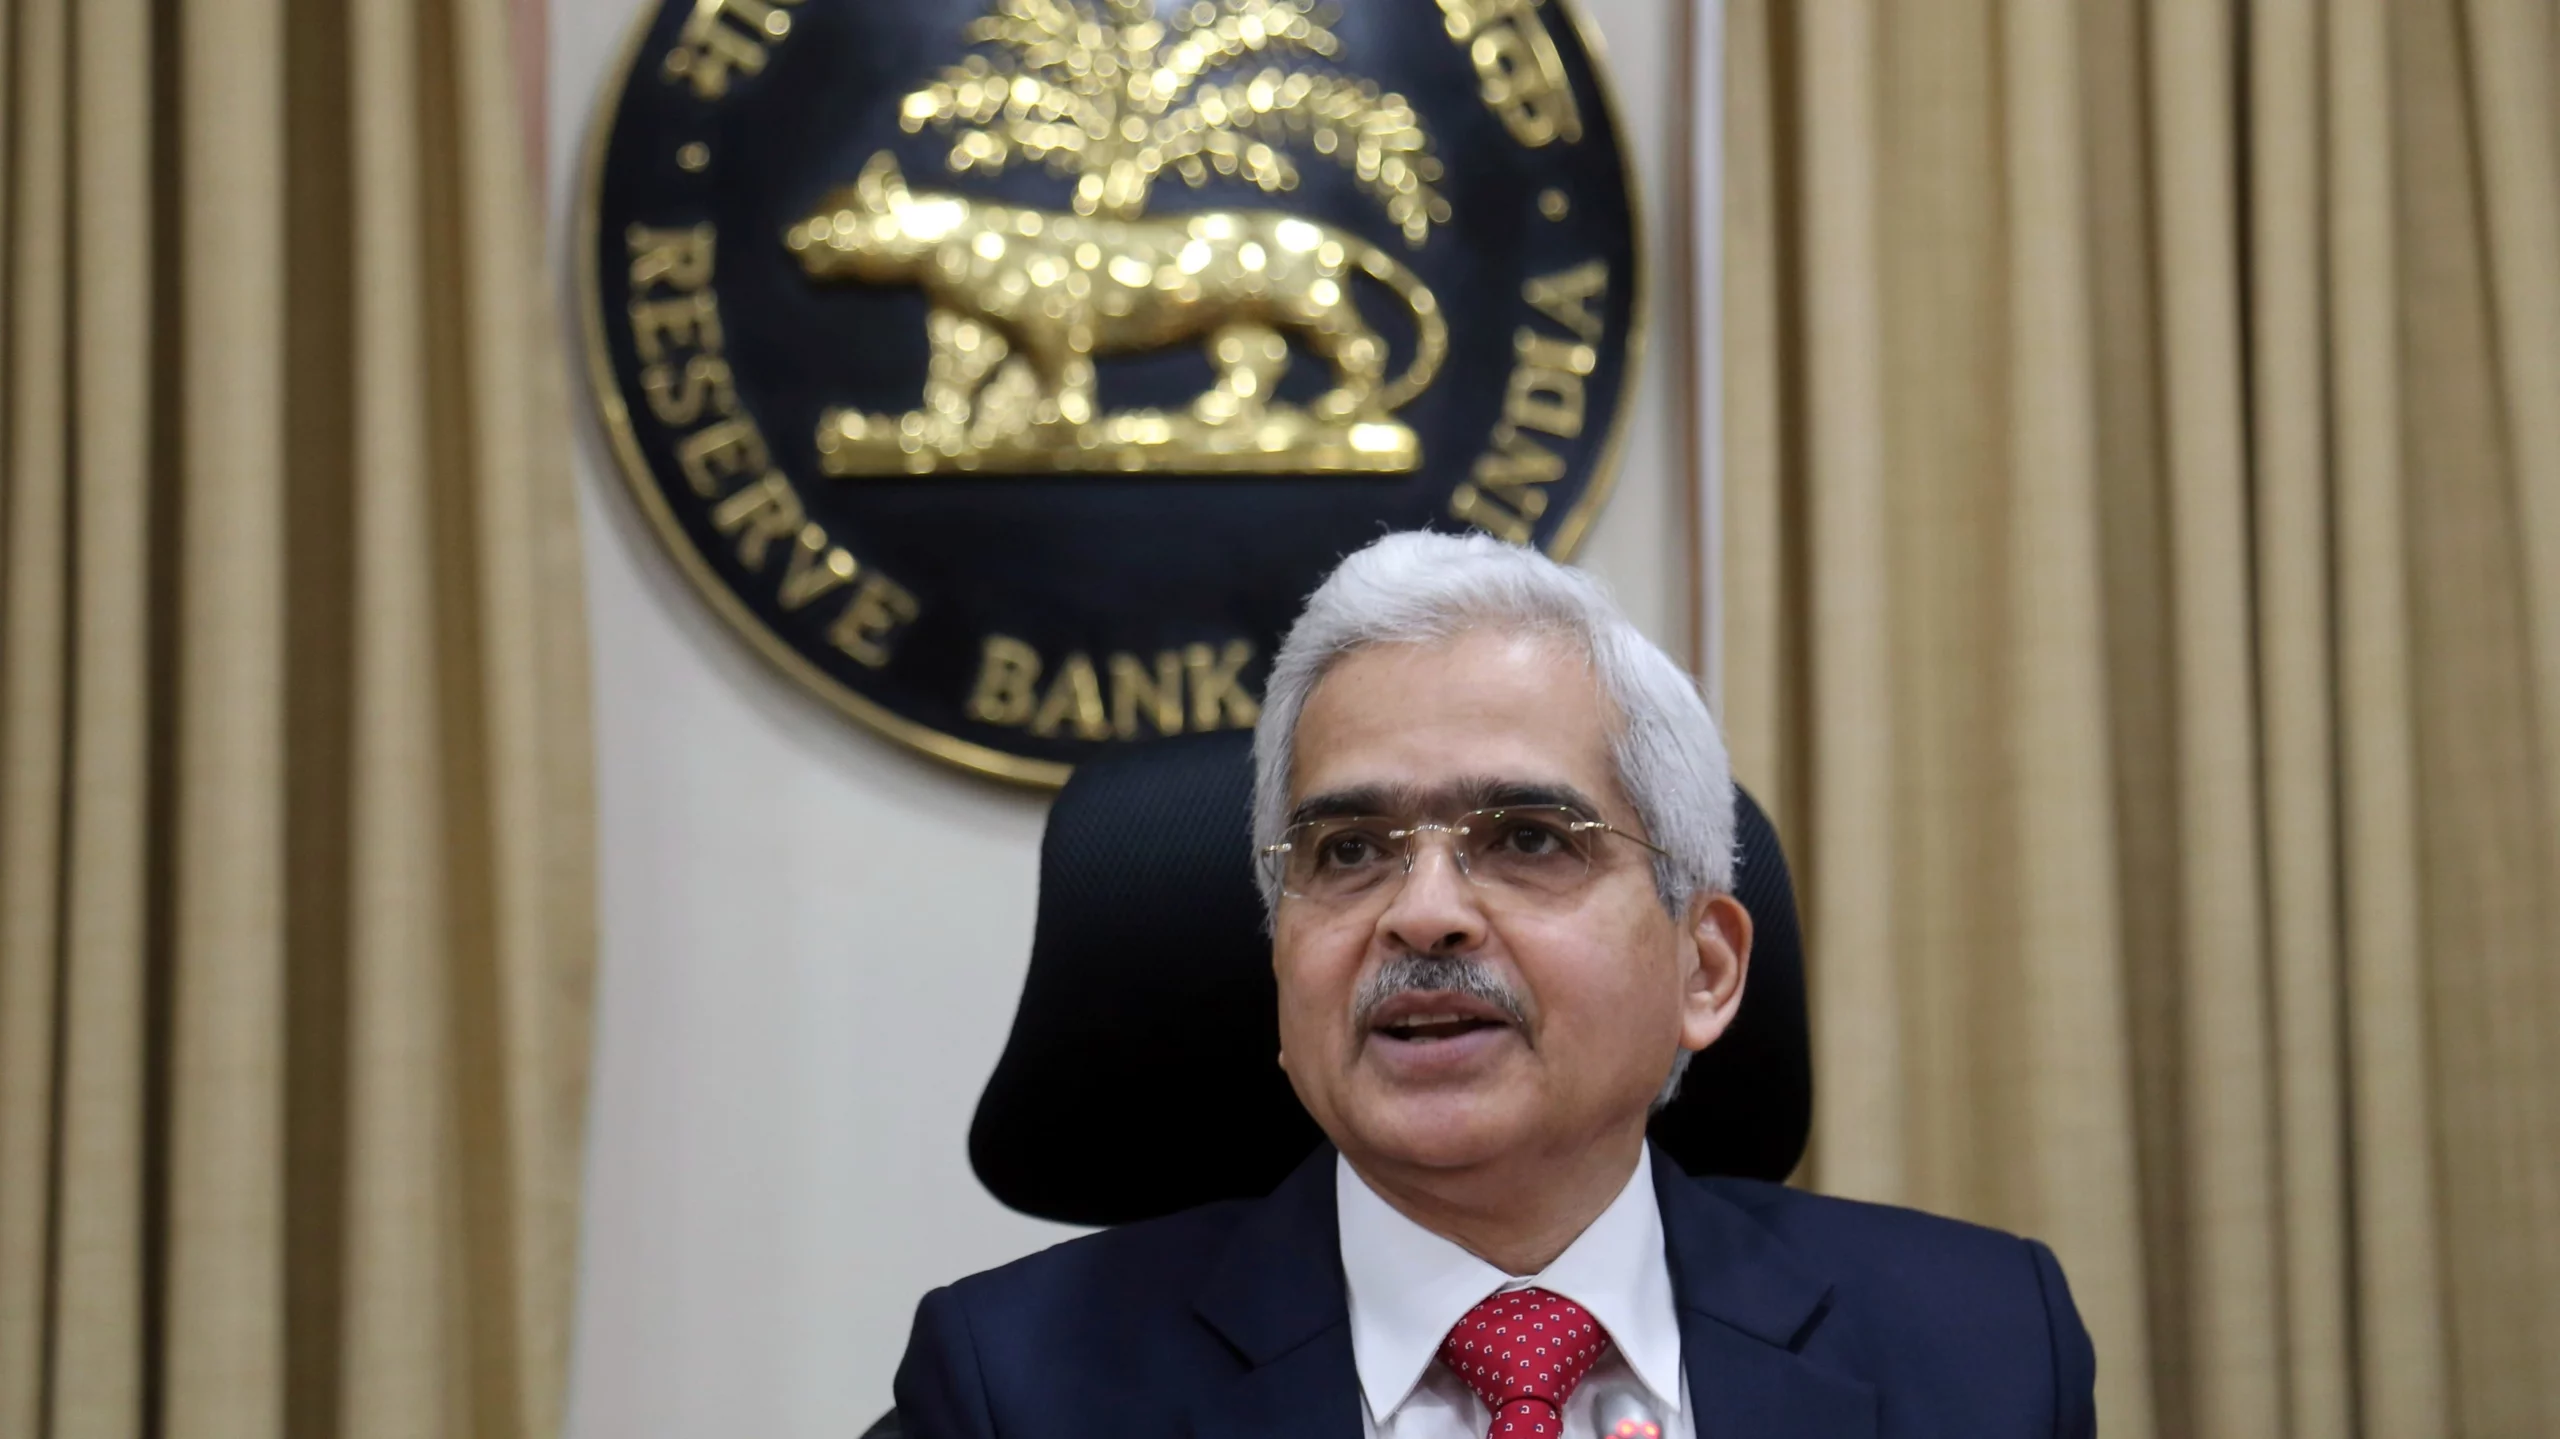 Indian economy presents a picture of resilience amid global shocks, says Reserve Bank of India Governor Shaktikanta Das